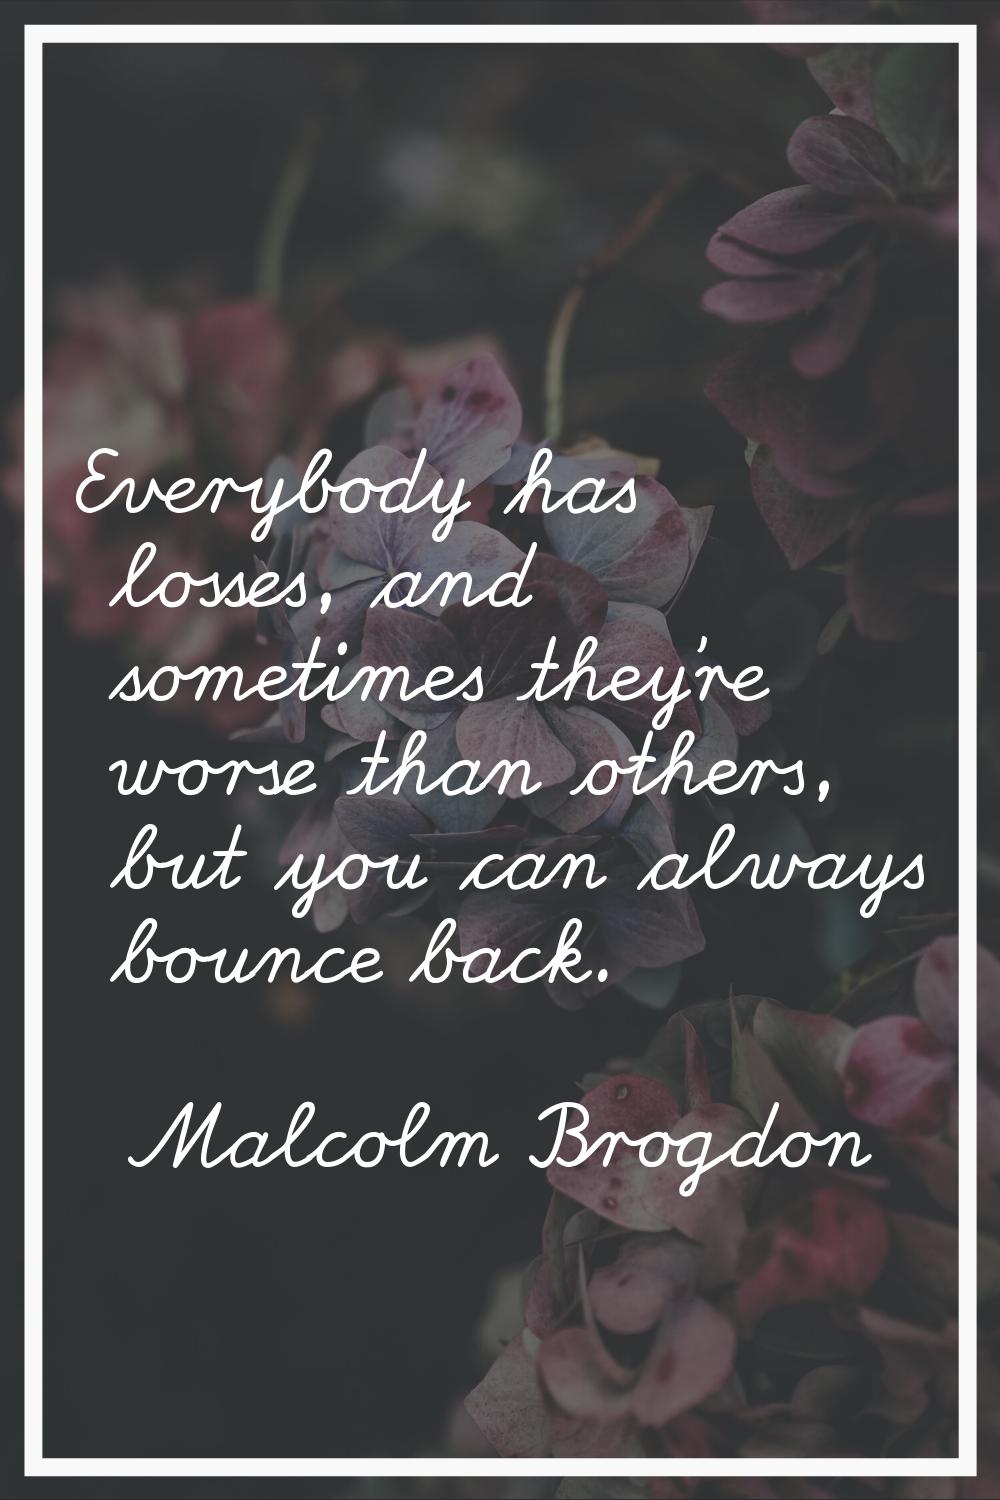 Everybody has losses, and sometimes they're worse than others, but you can always bounce back.